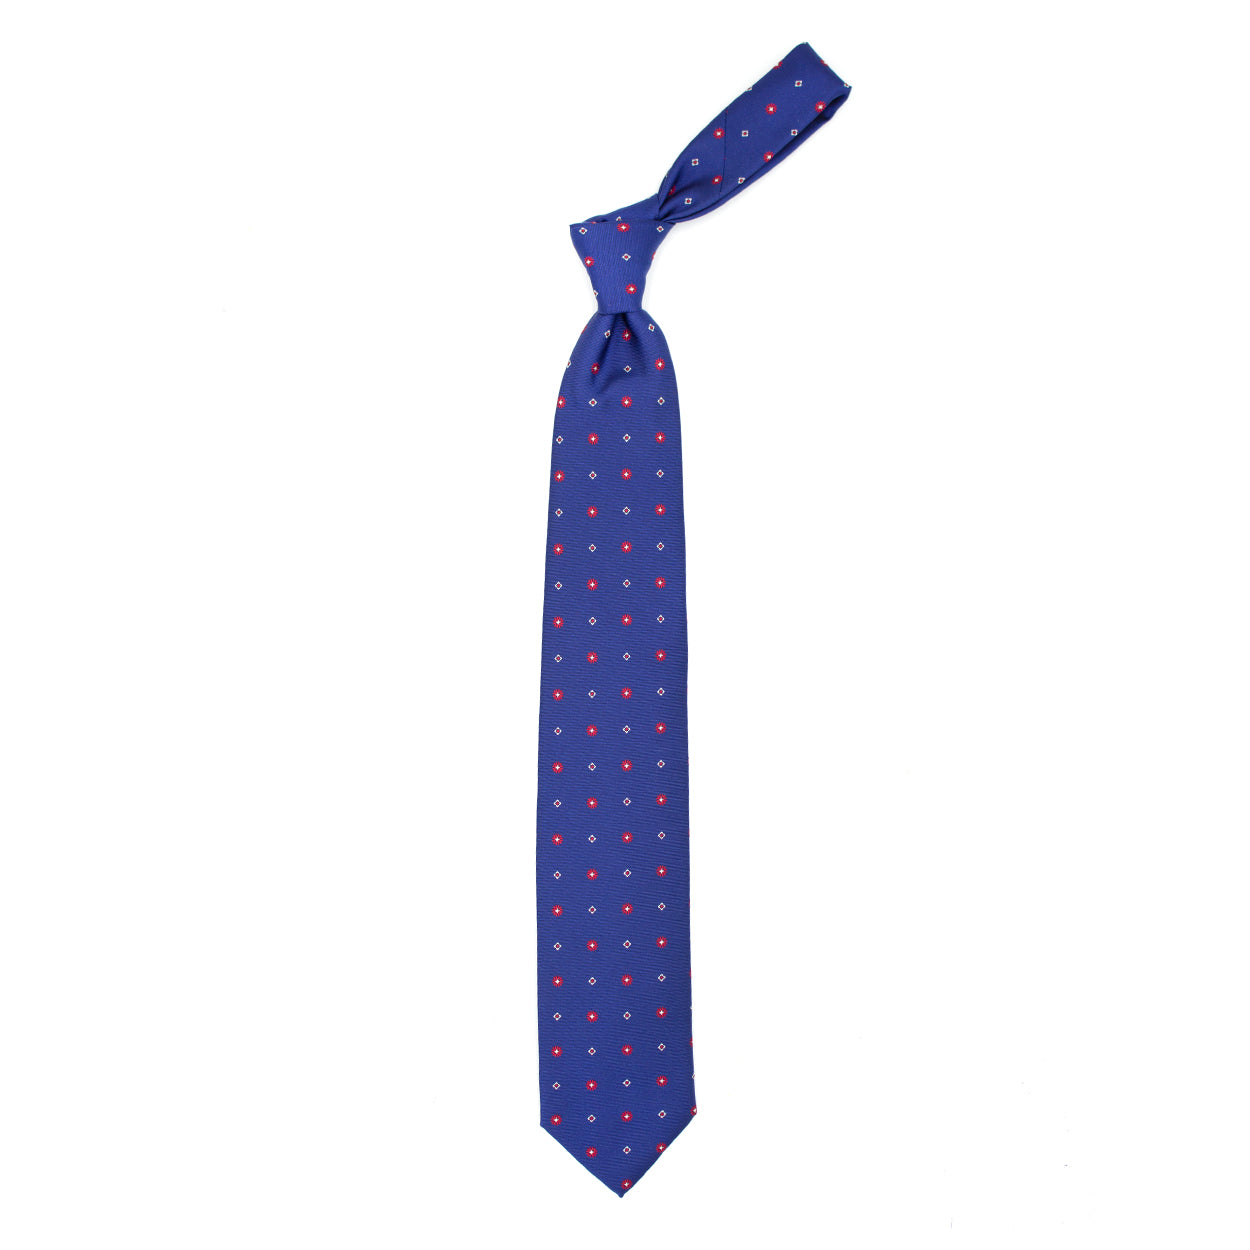 Blue tie with flowers and red and white squares